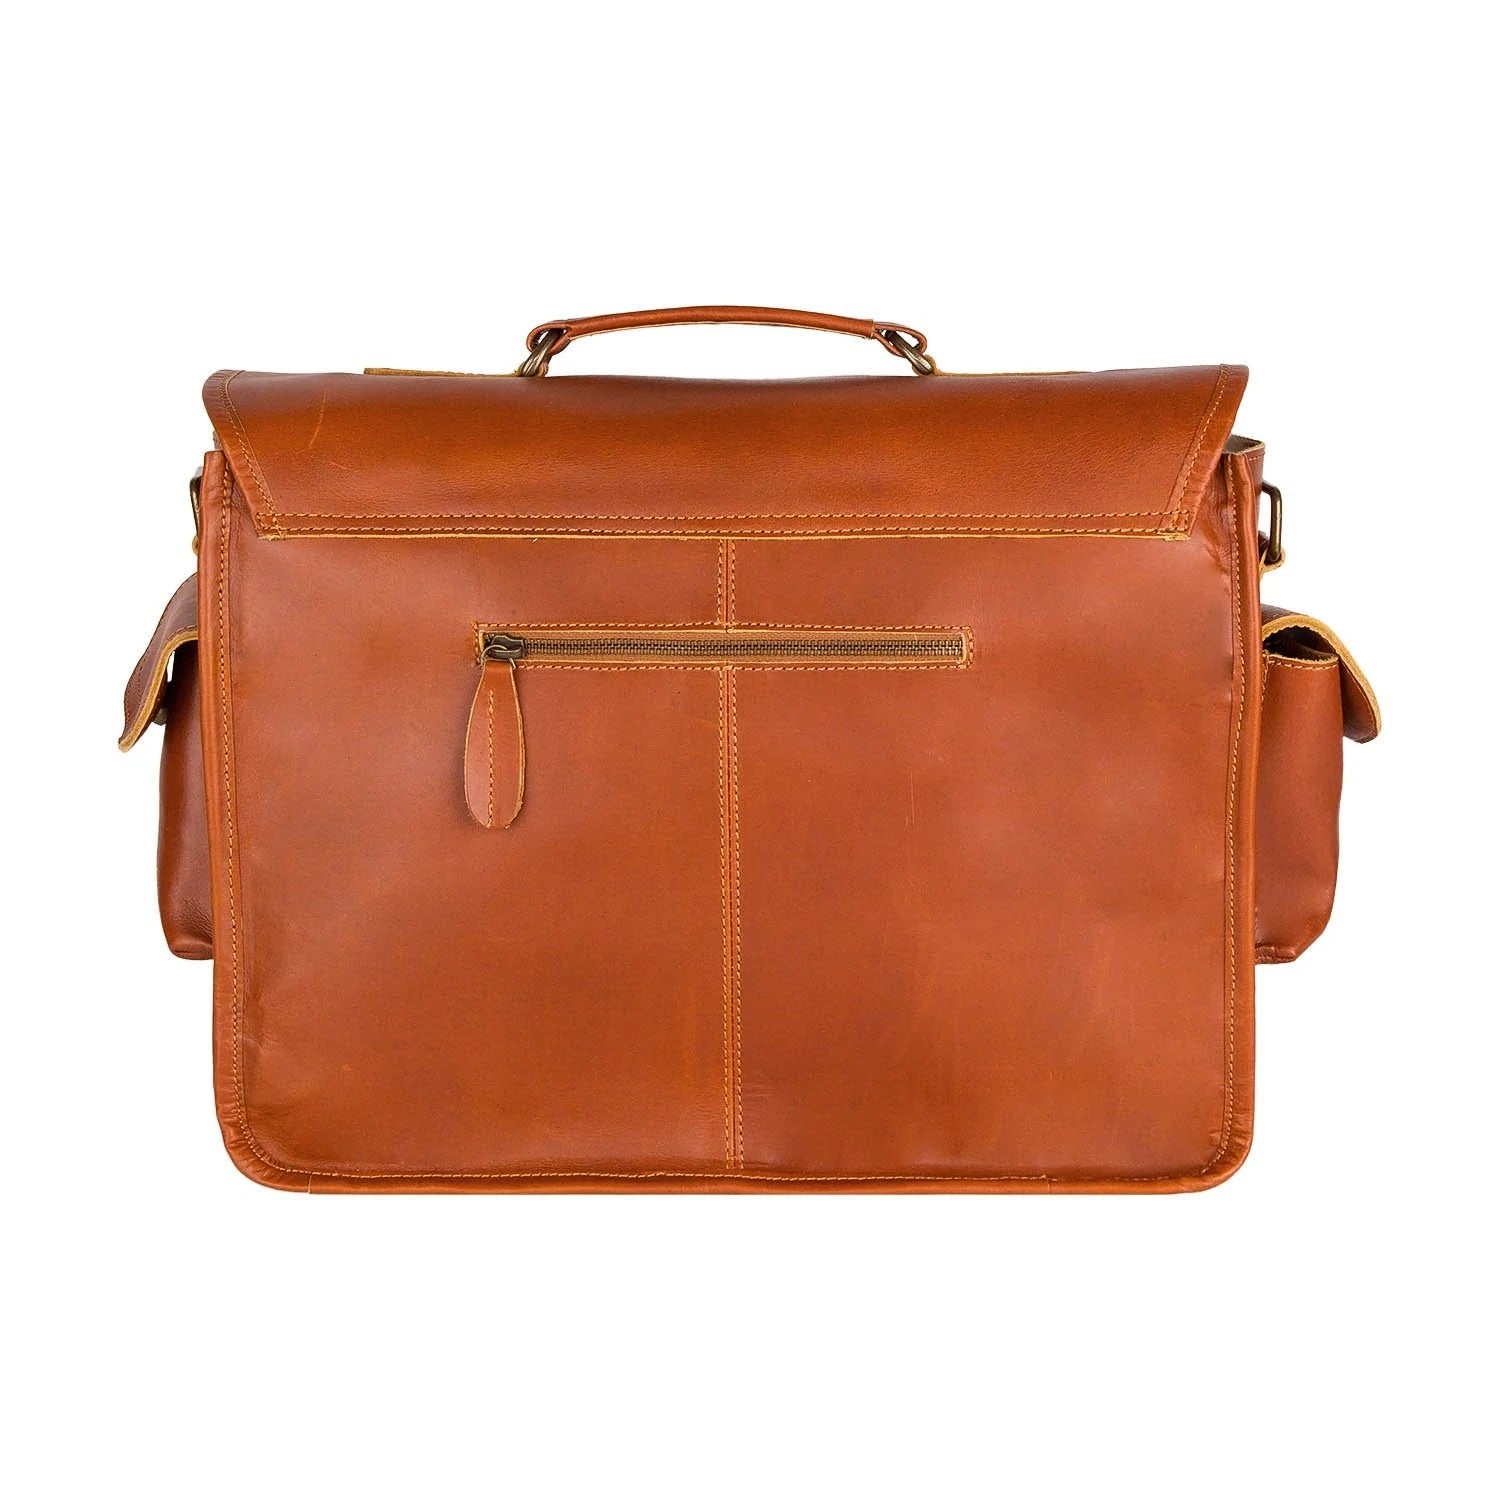 Leather Tan leather Leather Satchels